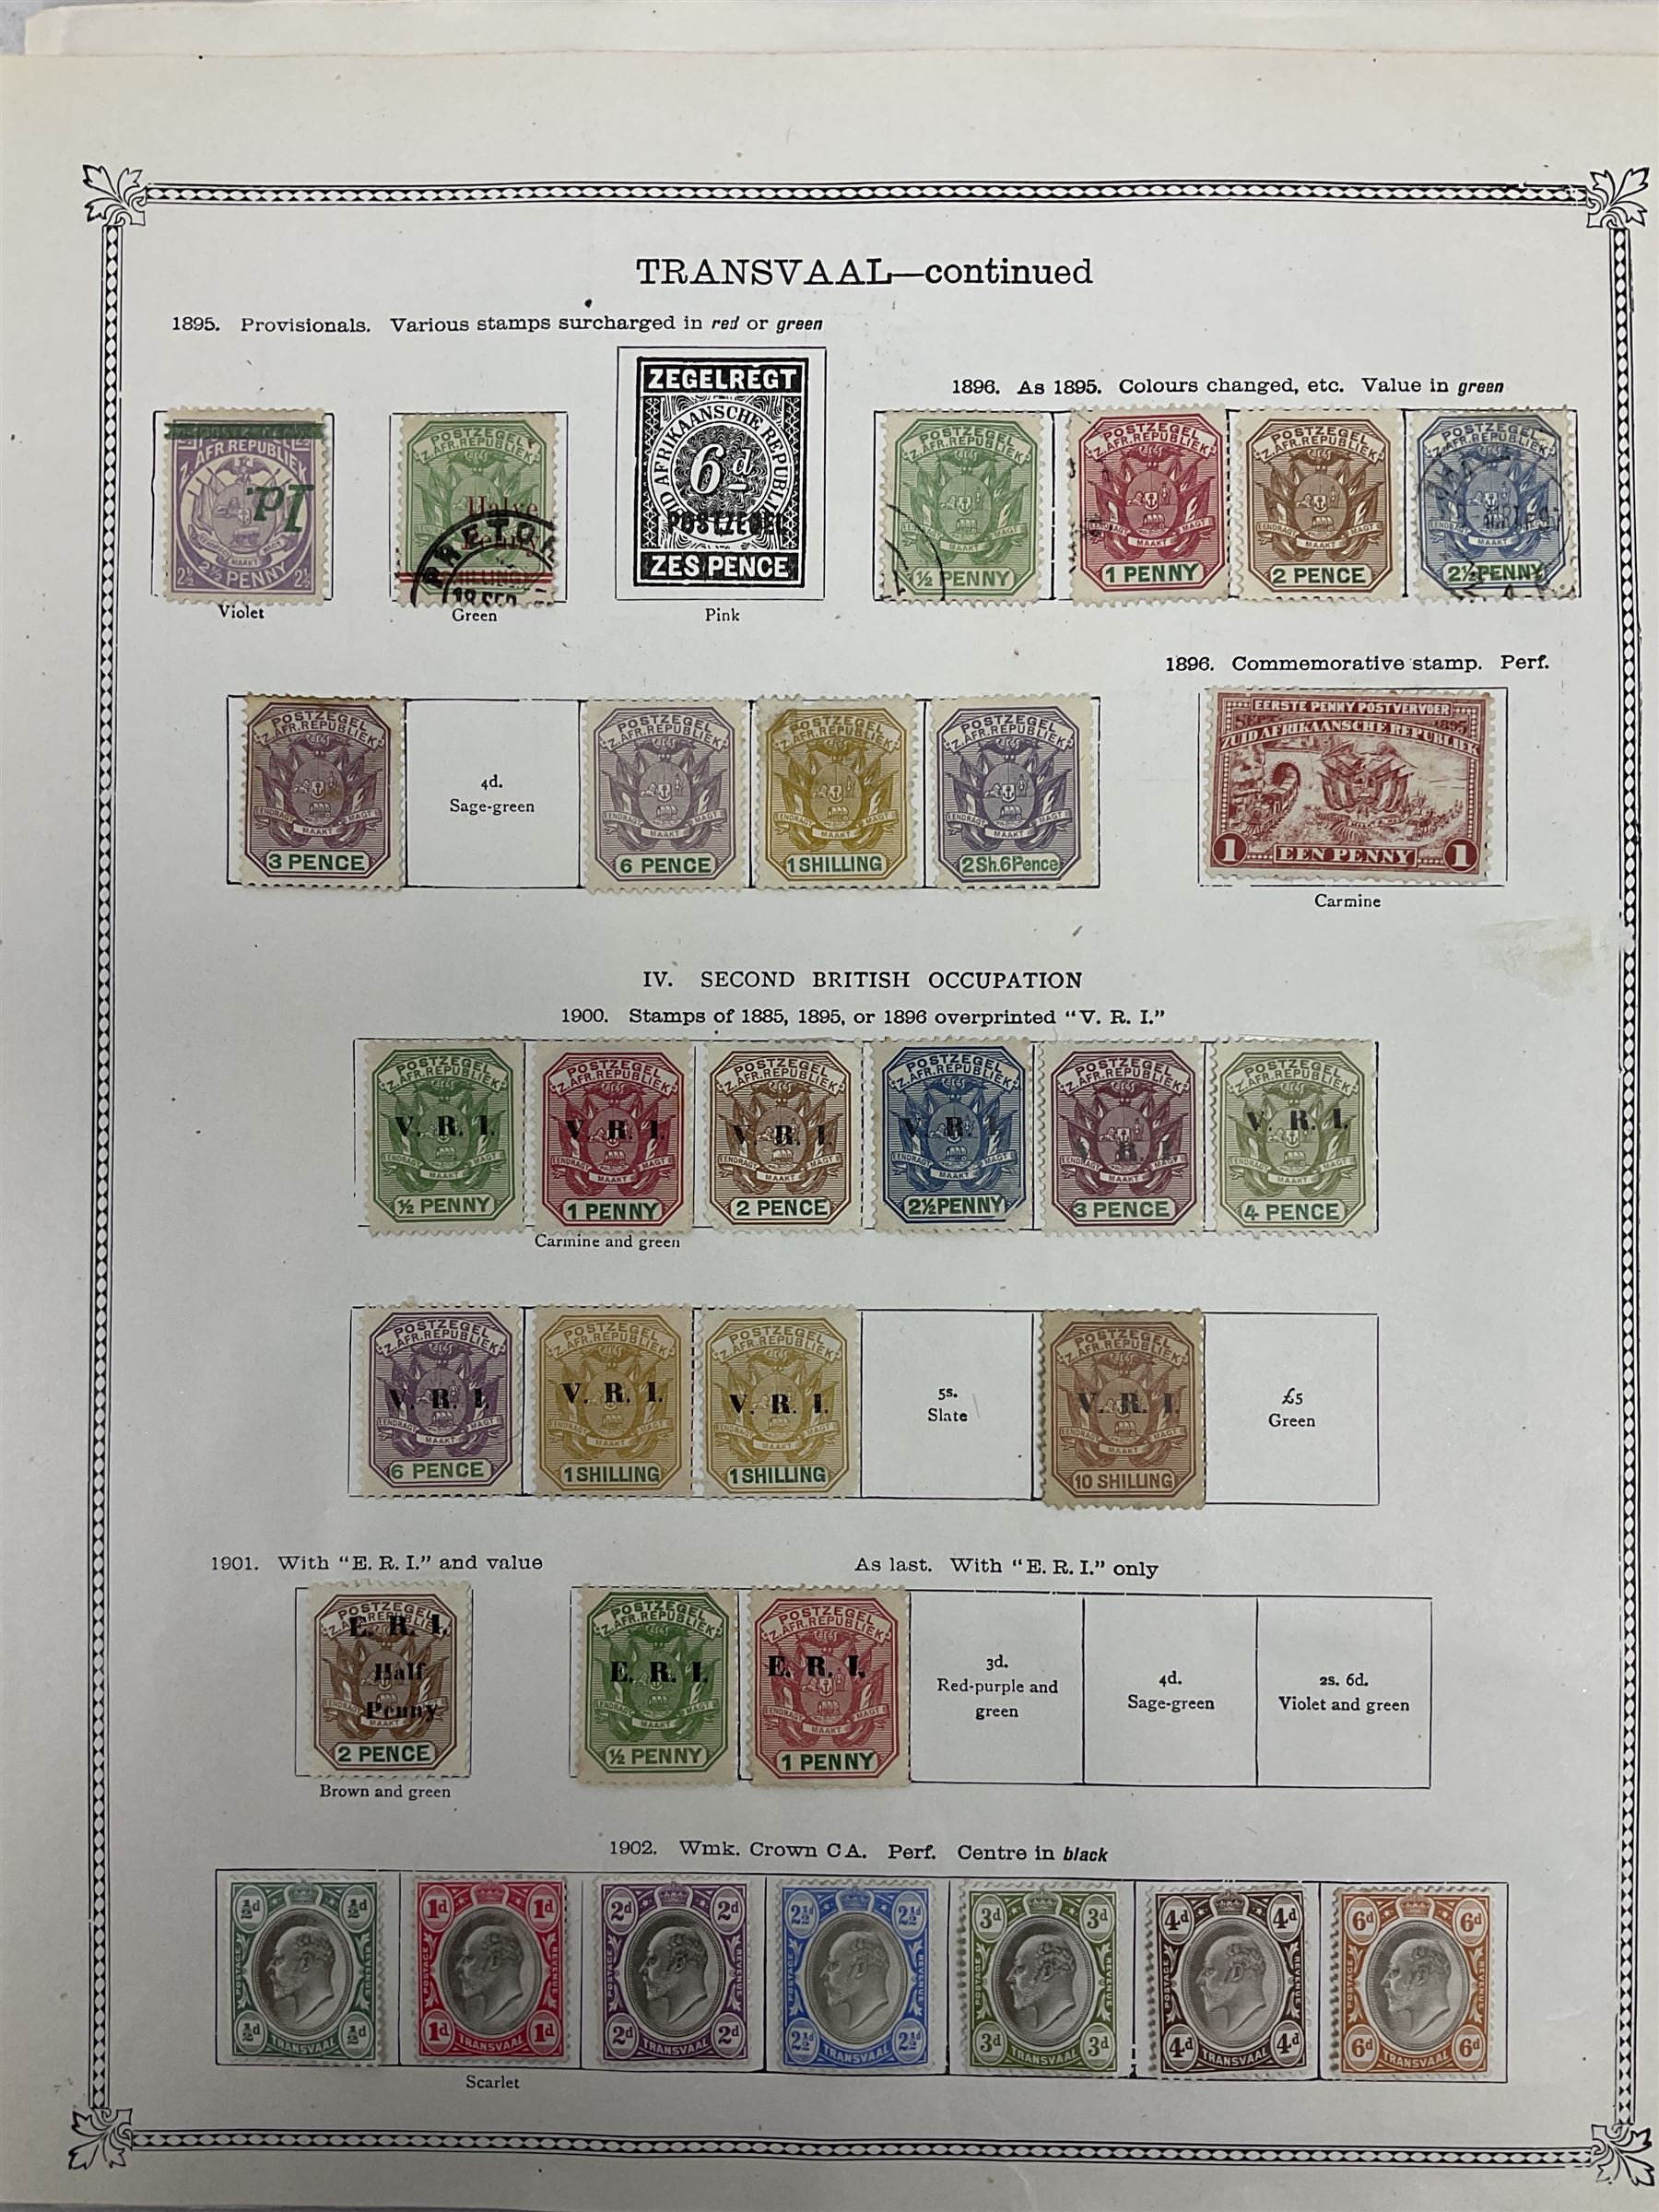 Transvaal stamps - Image 6 of 15